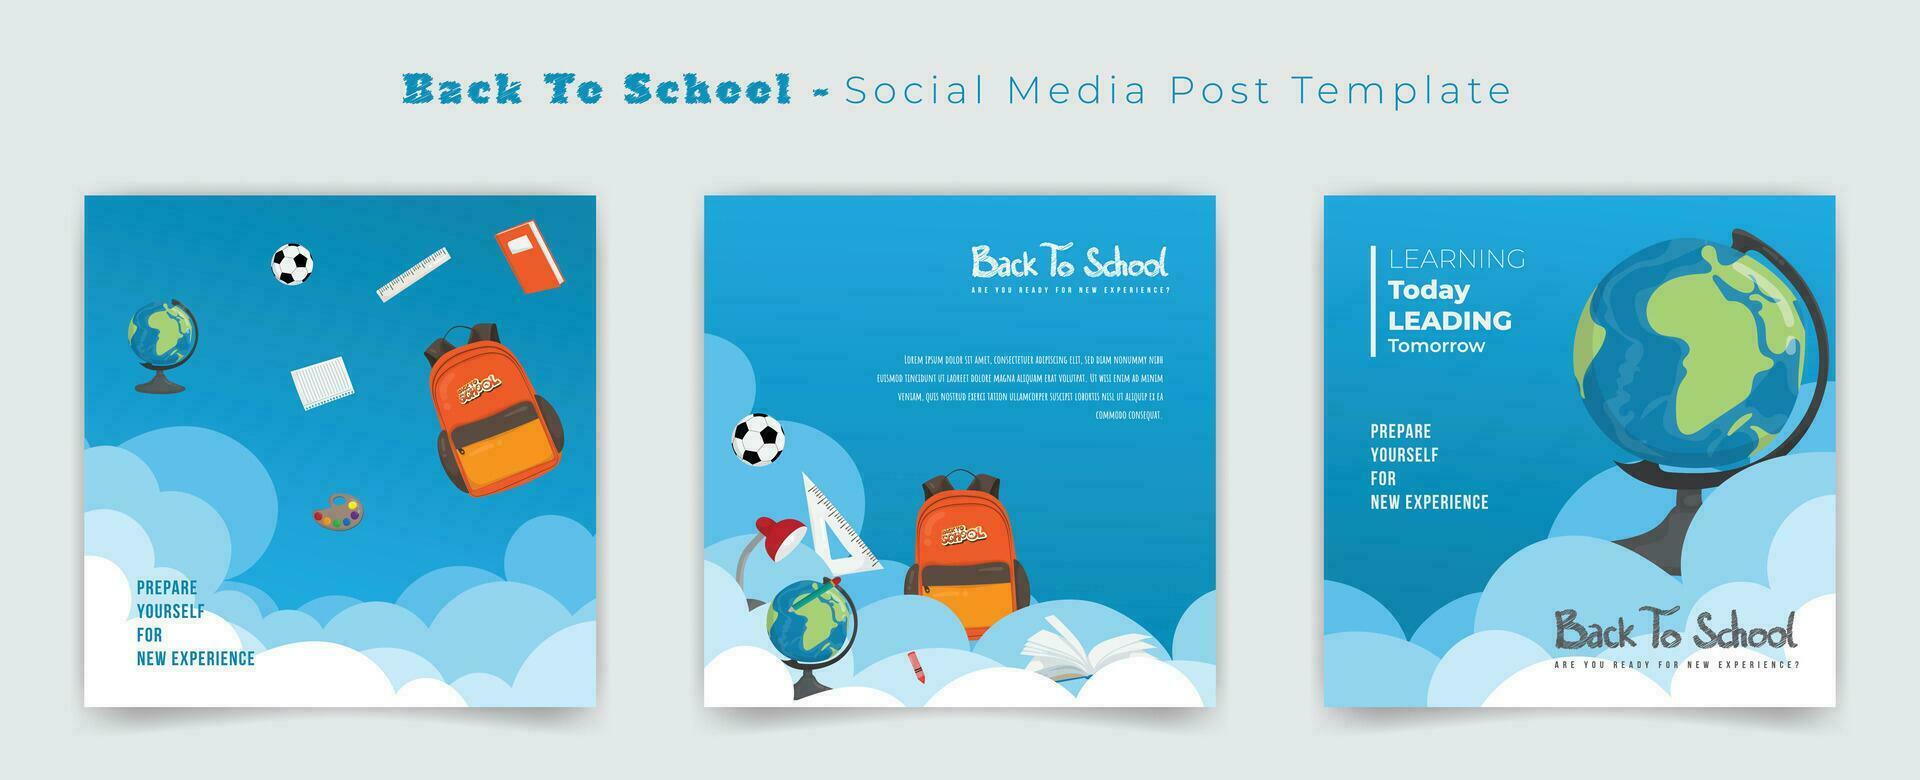 Set of social media post template for back to school with cloud background design vector